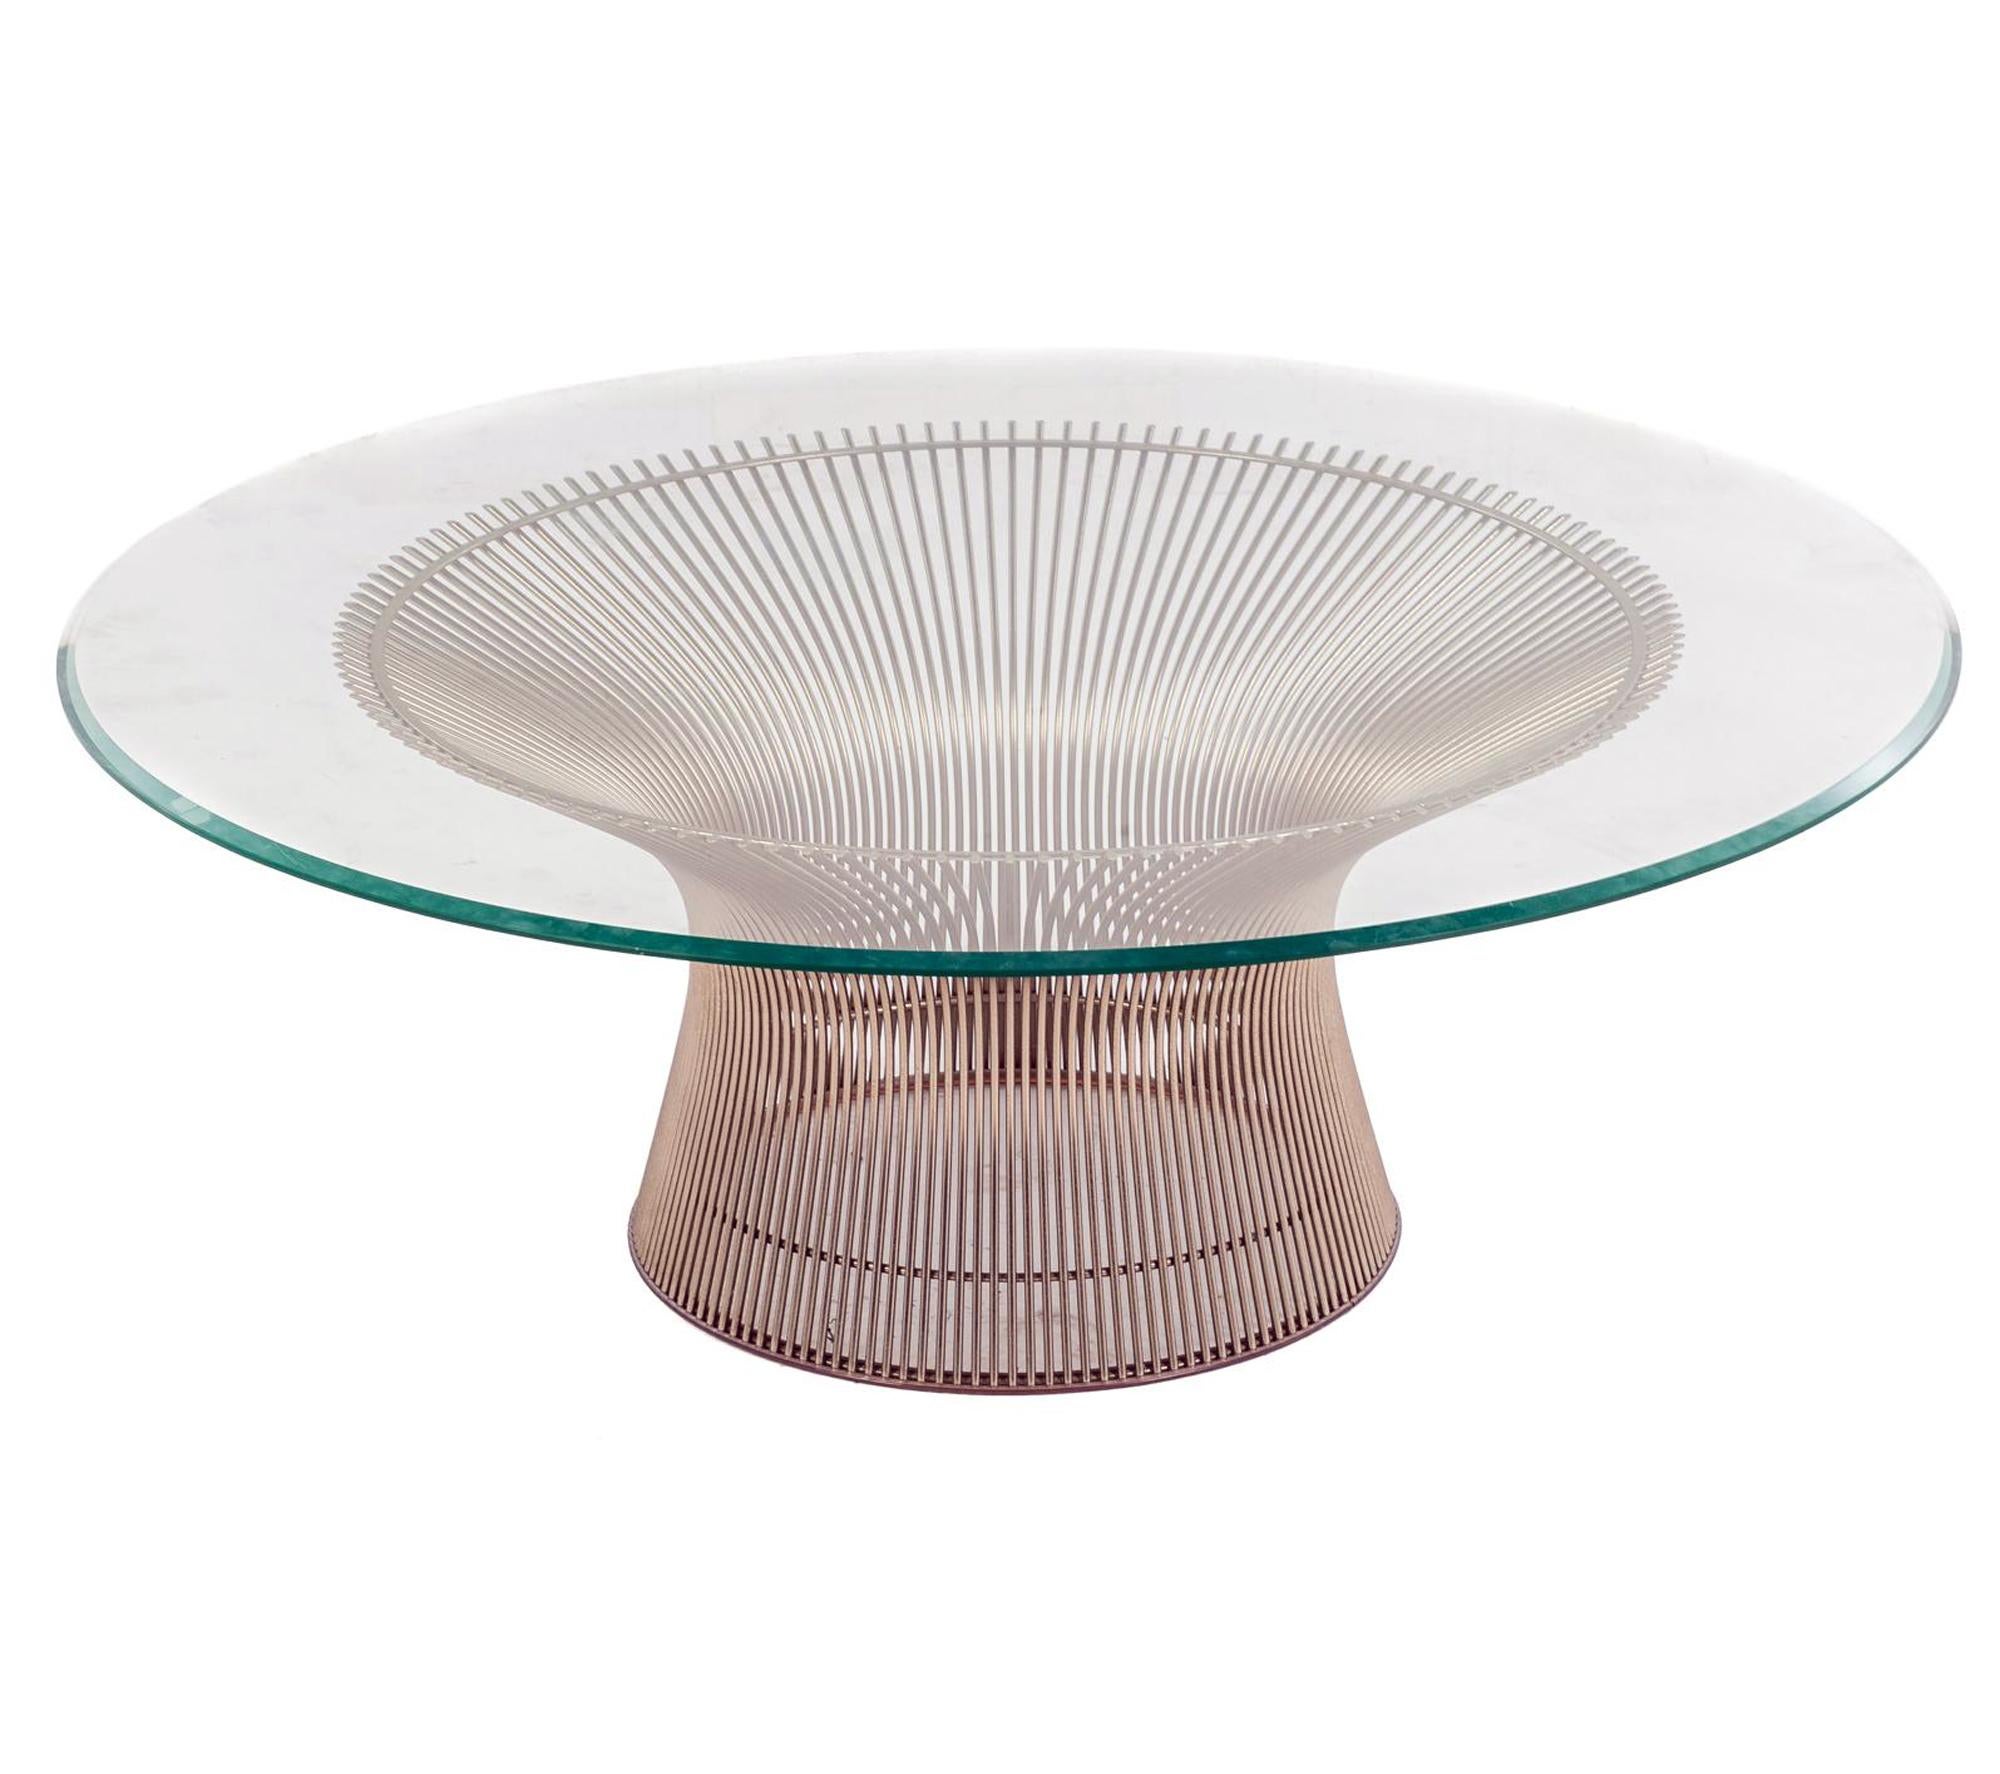 Warren platner coffee table,
Design-Warren Platner, 1966.

The Warren Planter circular table consists of a chrome-plated circular steel base with an overhanging beveled round glass top.

The iconic coffee table is created by welding hundreds of